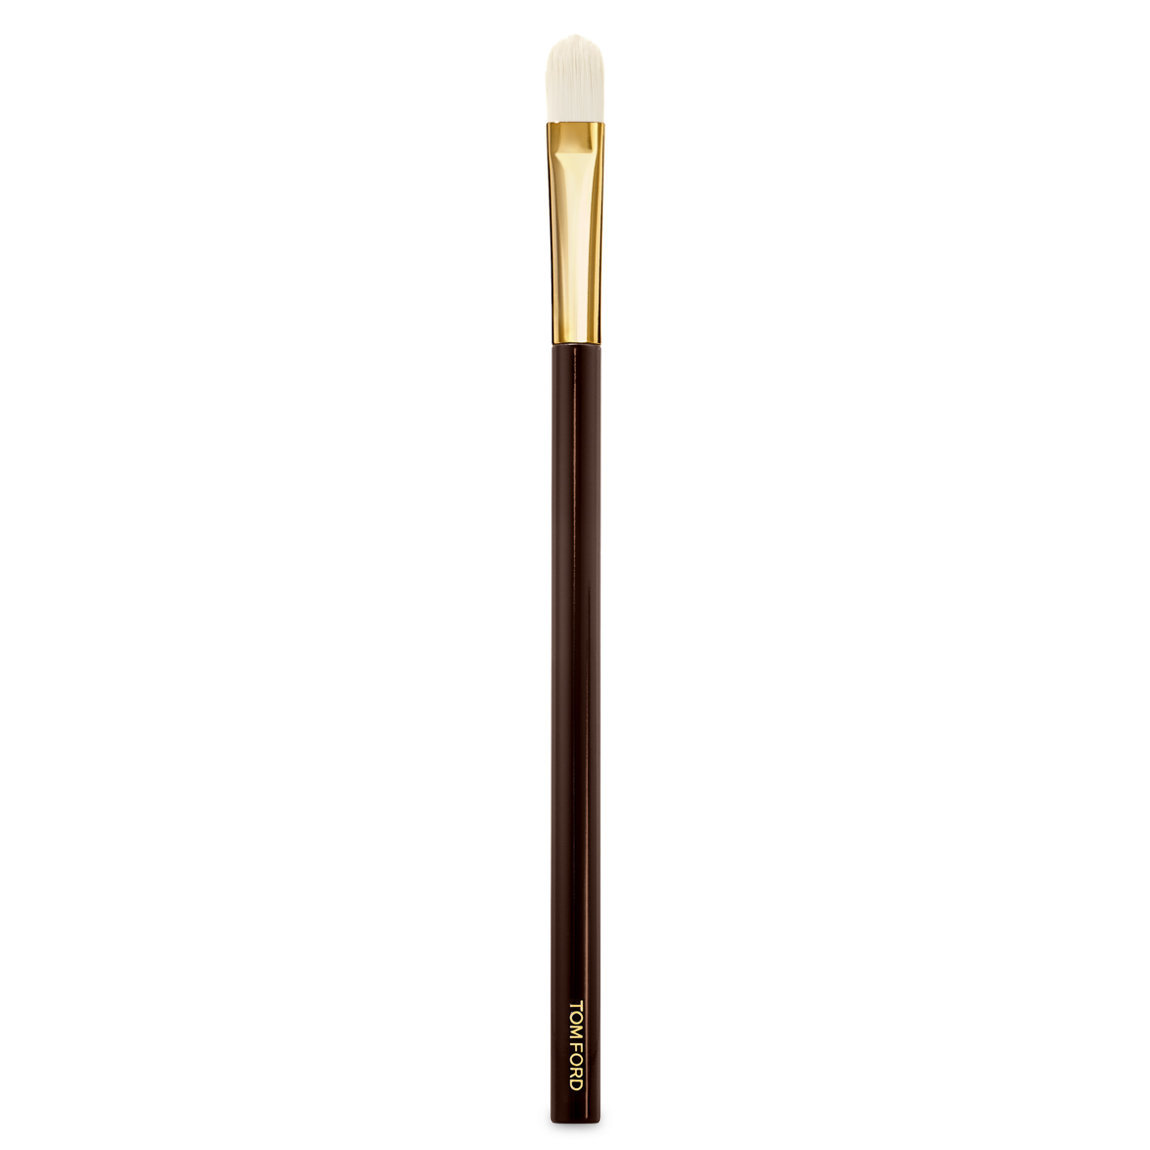 TOM FORD Concealer Brush 03 alternative view 1 - product swatch.